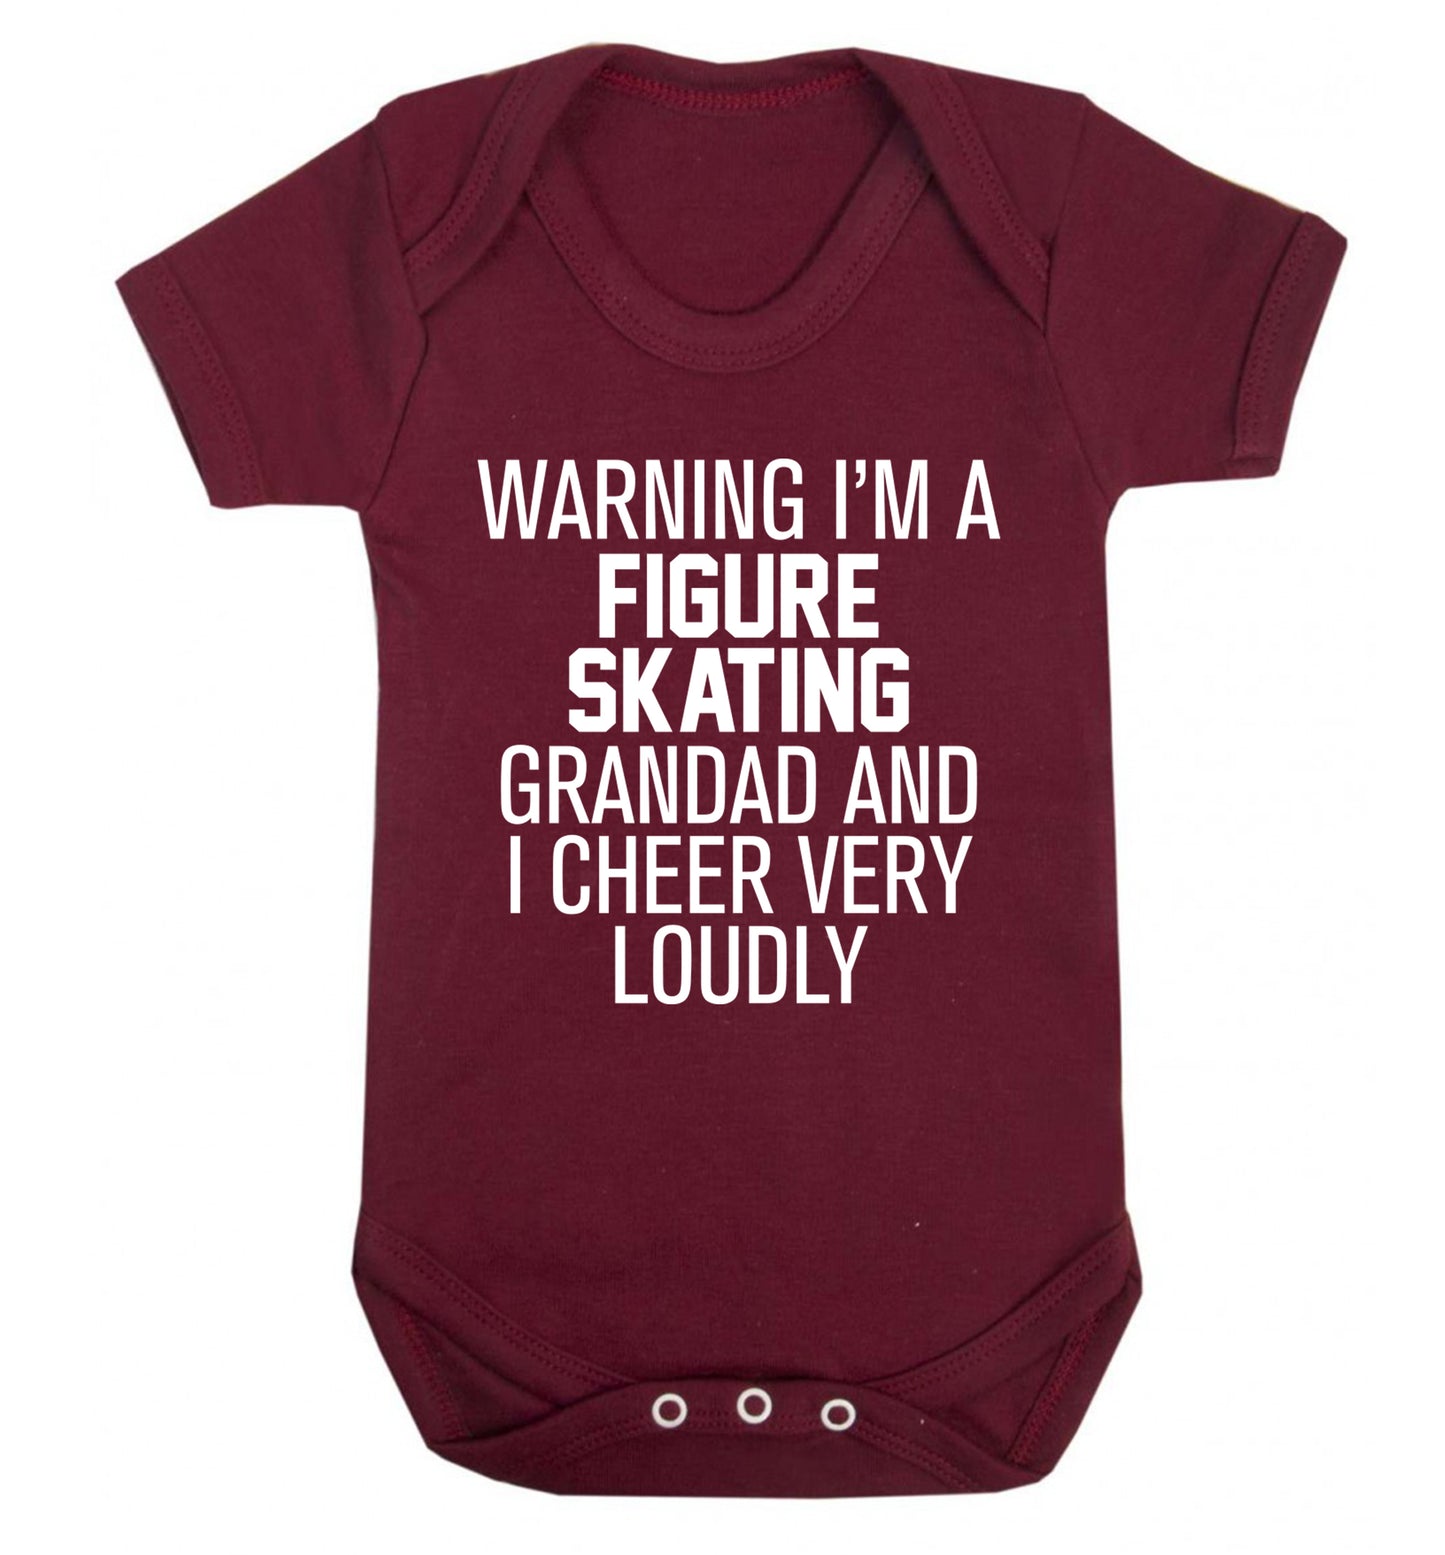 Warning I'm a figure skating grandad and I cheer very loudly Baby Vest maroon 18-24 months